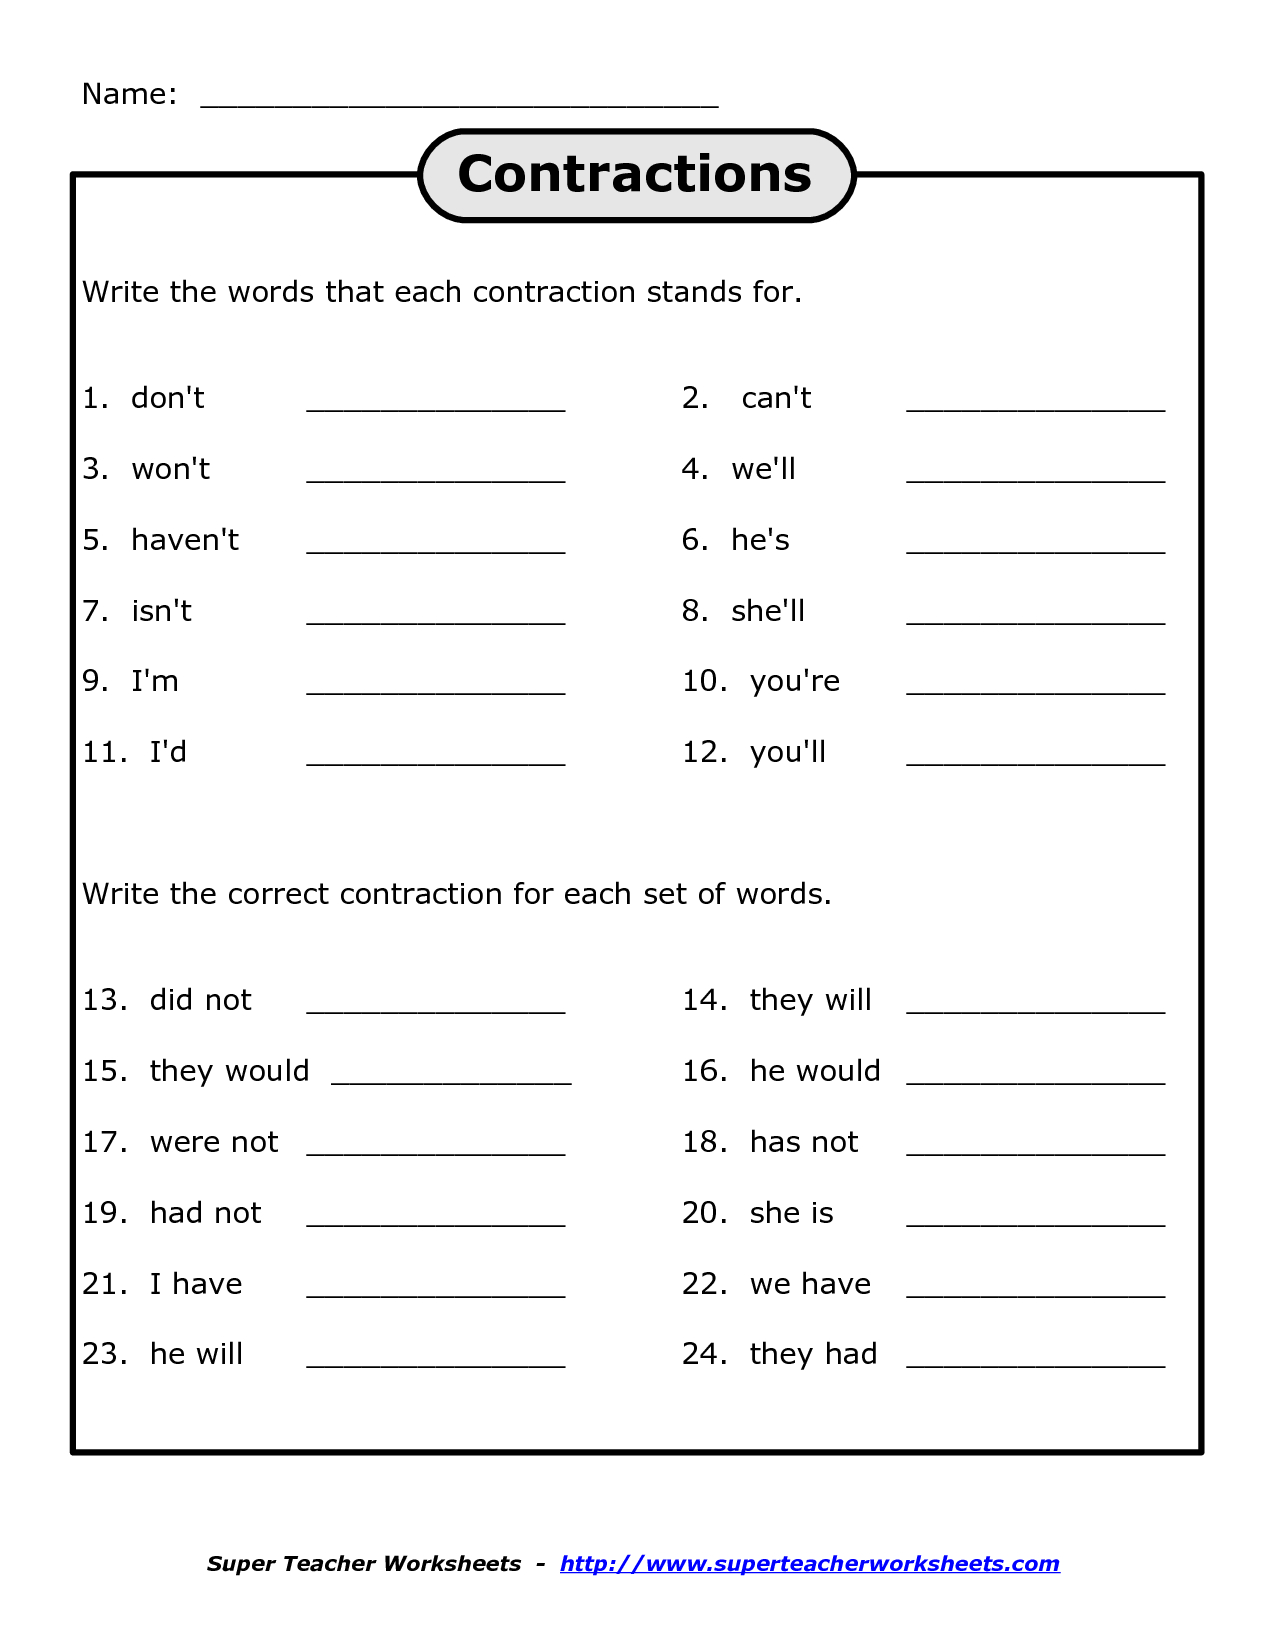 Free Printables For 4Th Grade Science | Free Printable Contraction - Free Printable Grammar Worksheets For 2Nd Grade